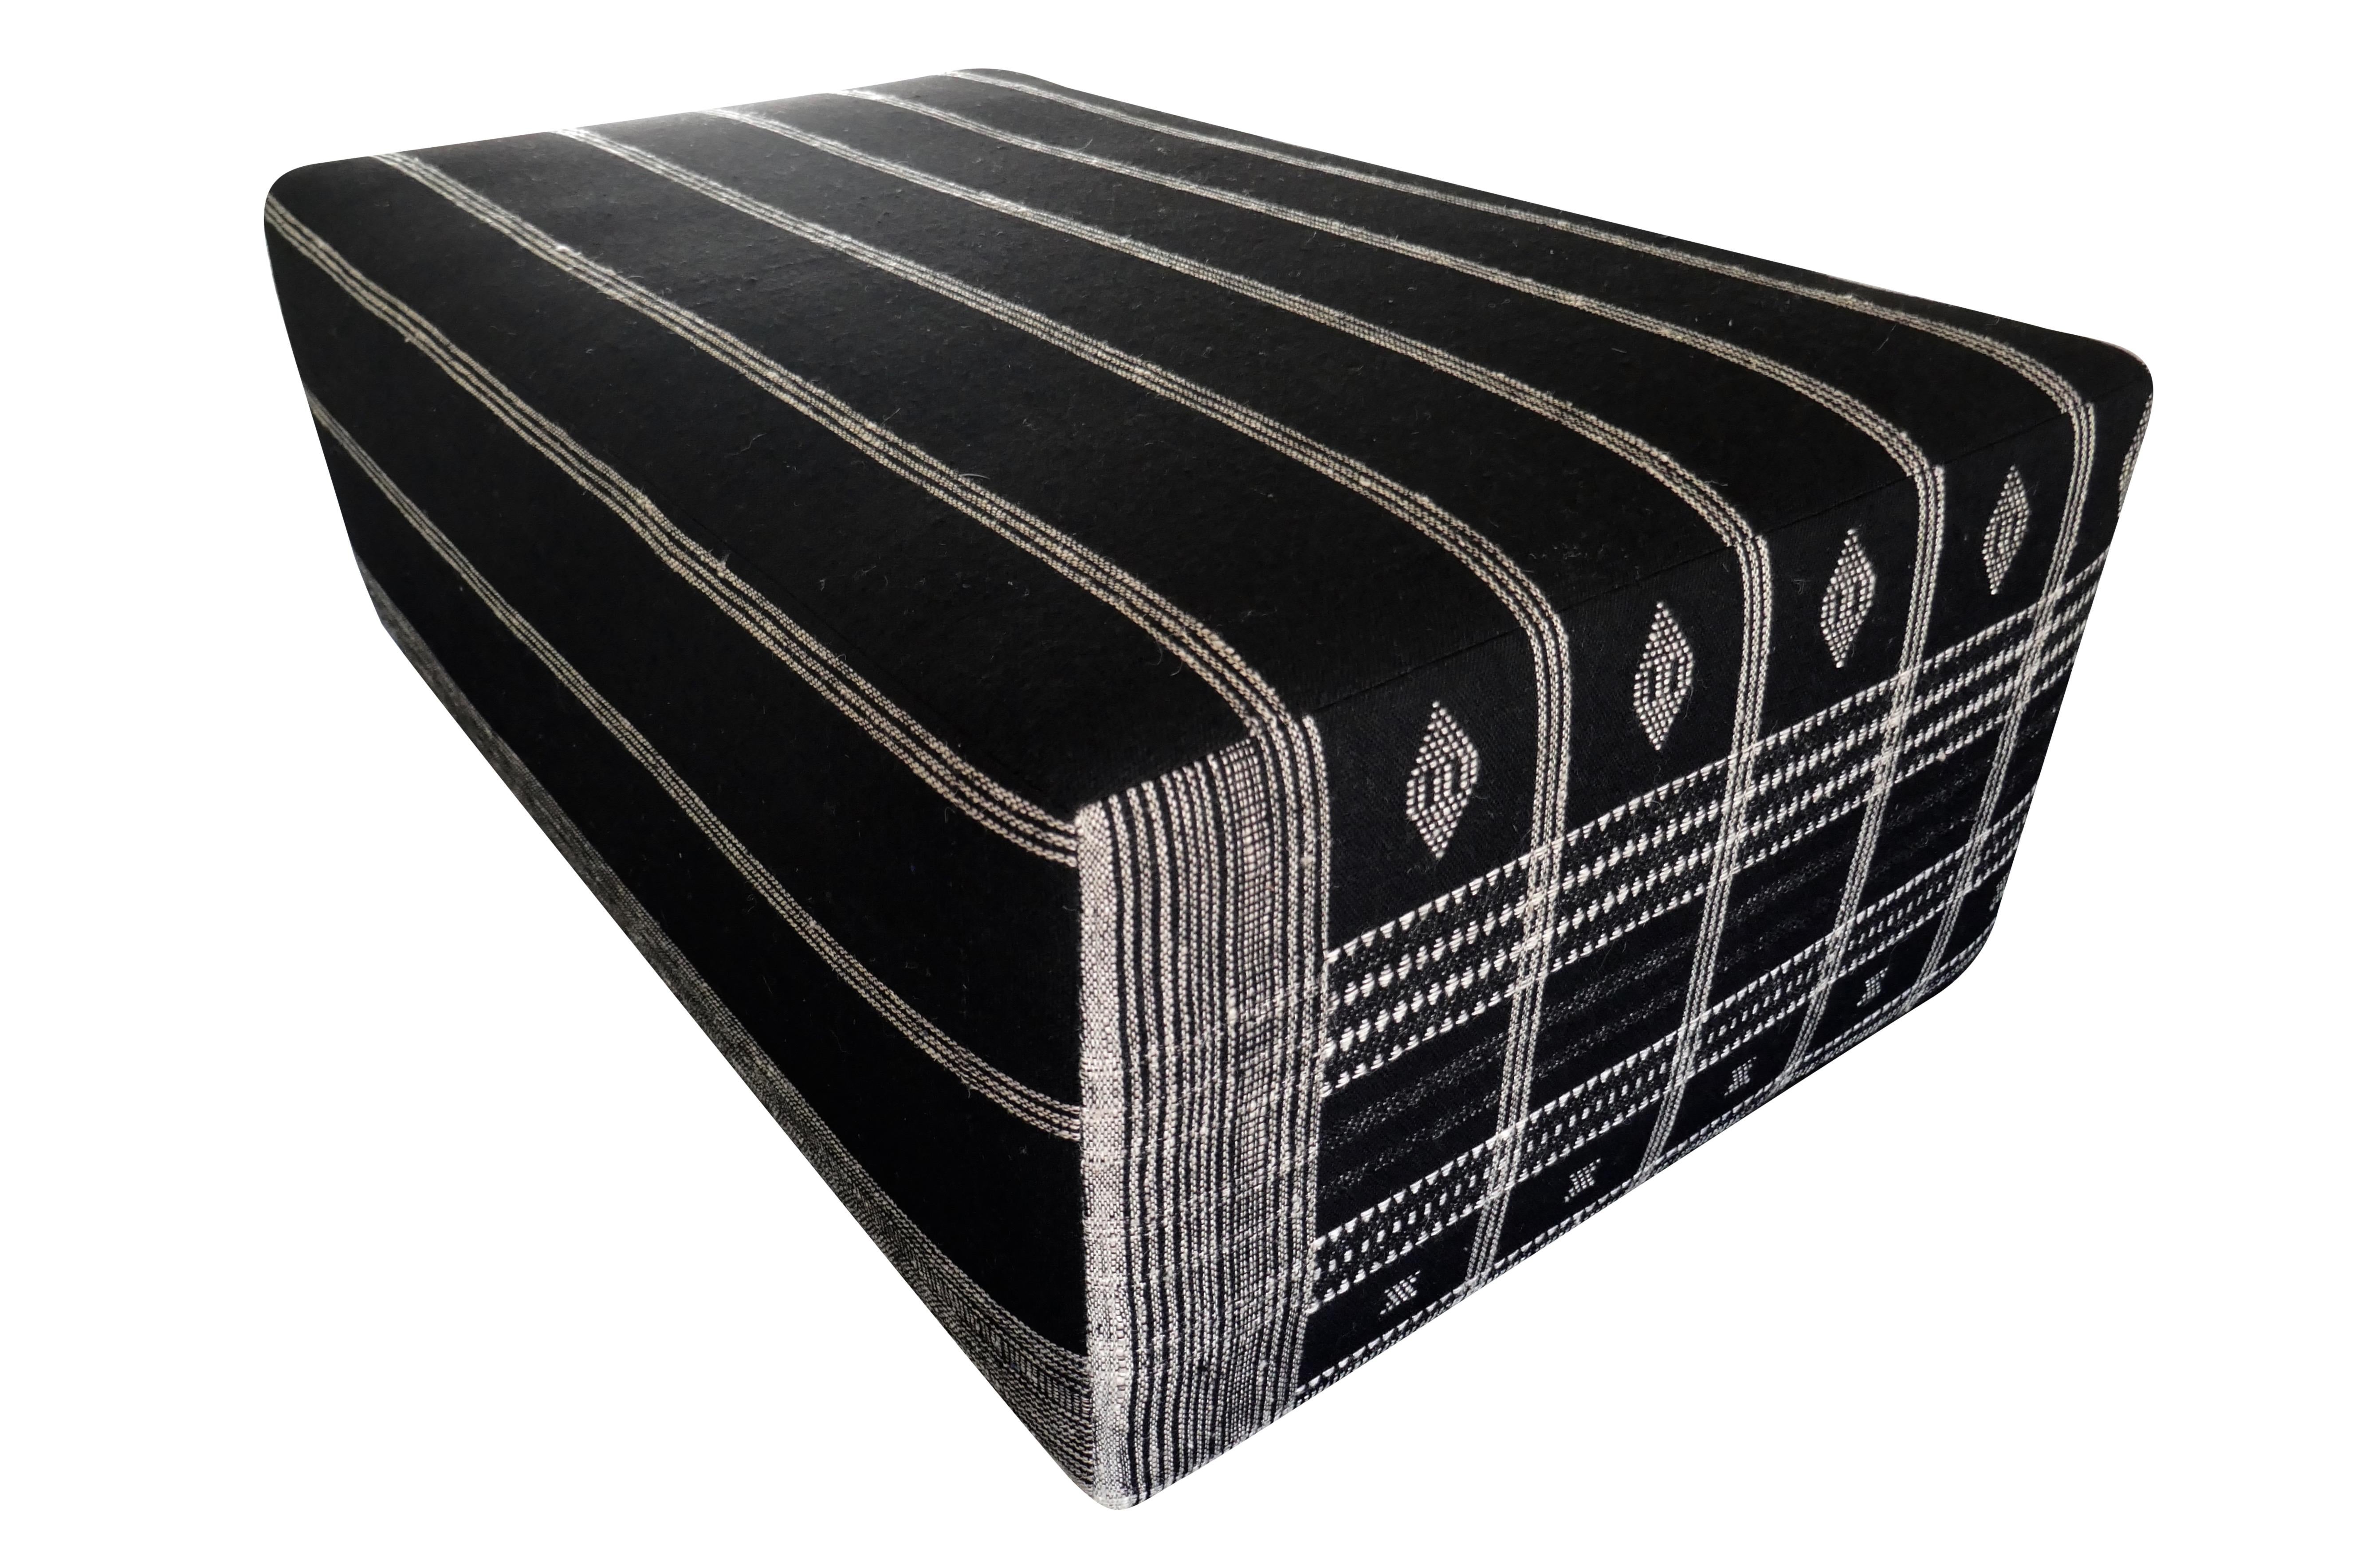 FI large cocktail style ottoman, perfectly upholstered in beautiful authentic hand-woven & embroidered heavy textural Berber tribal organic black wool textile. Fully cushioned with a solid wood inner-frame, variable embroidered pattern on each side.